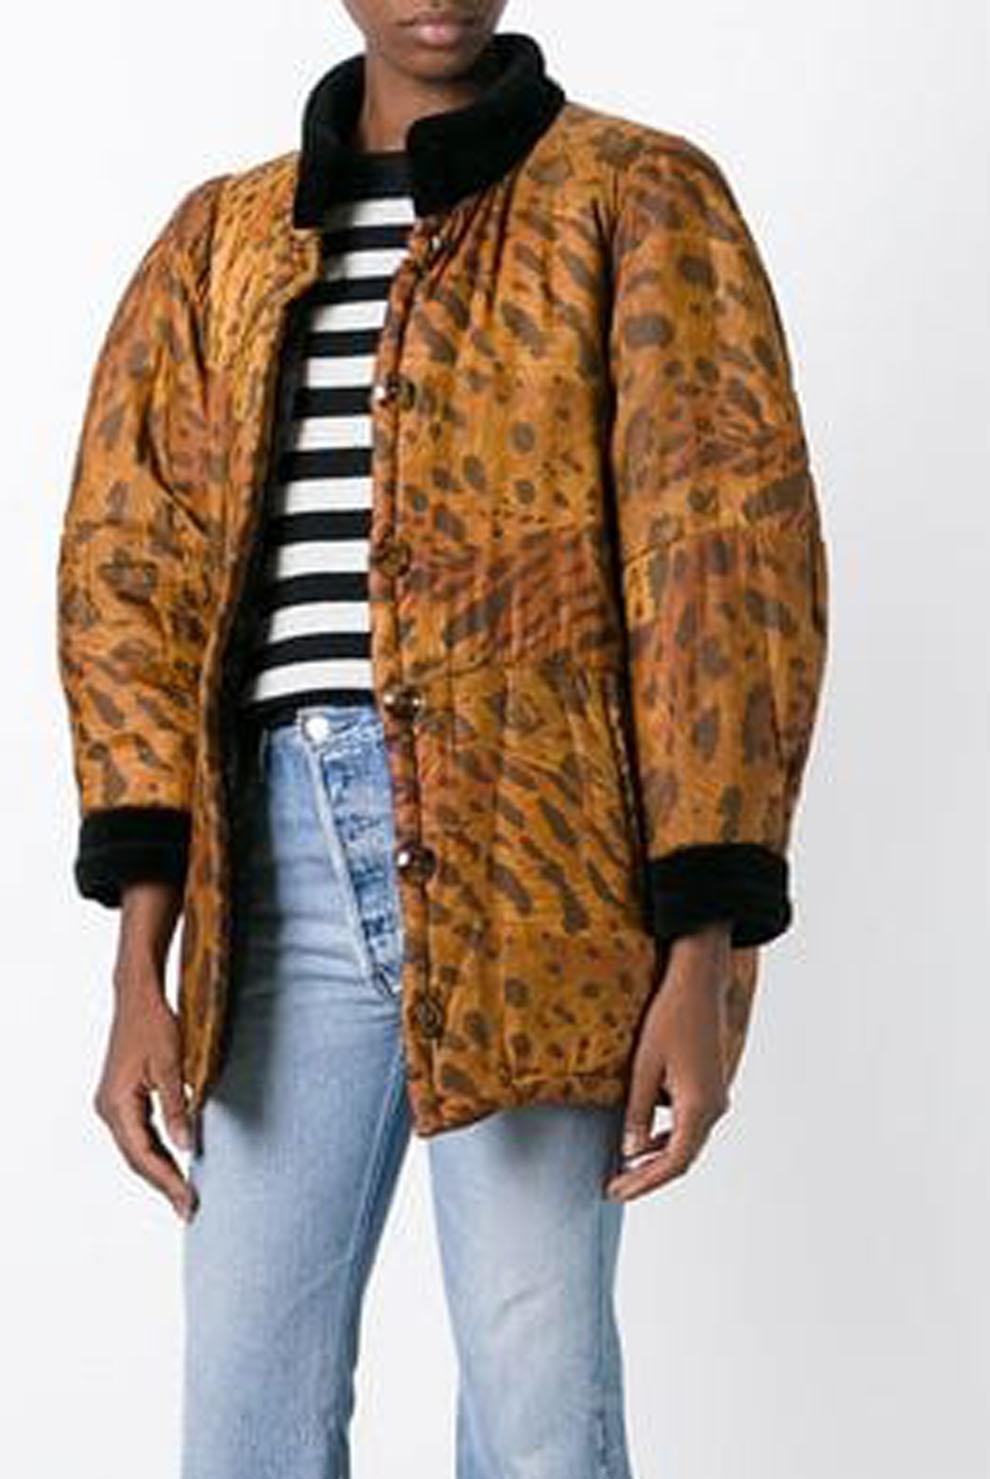 1996s Yves Saint Laurent brown silk animal print padded coat featuring a front button fastening, side pockets, long sleeves, a short length, a straight hem and a black velvet collar and cuffs. See catwalk image.
100% silk
In excellent vintage